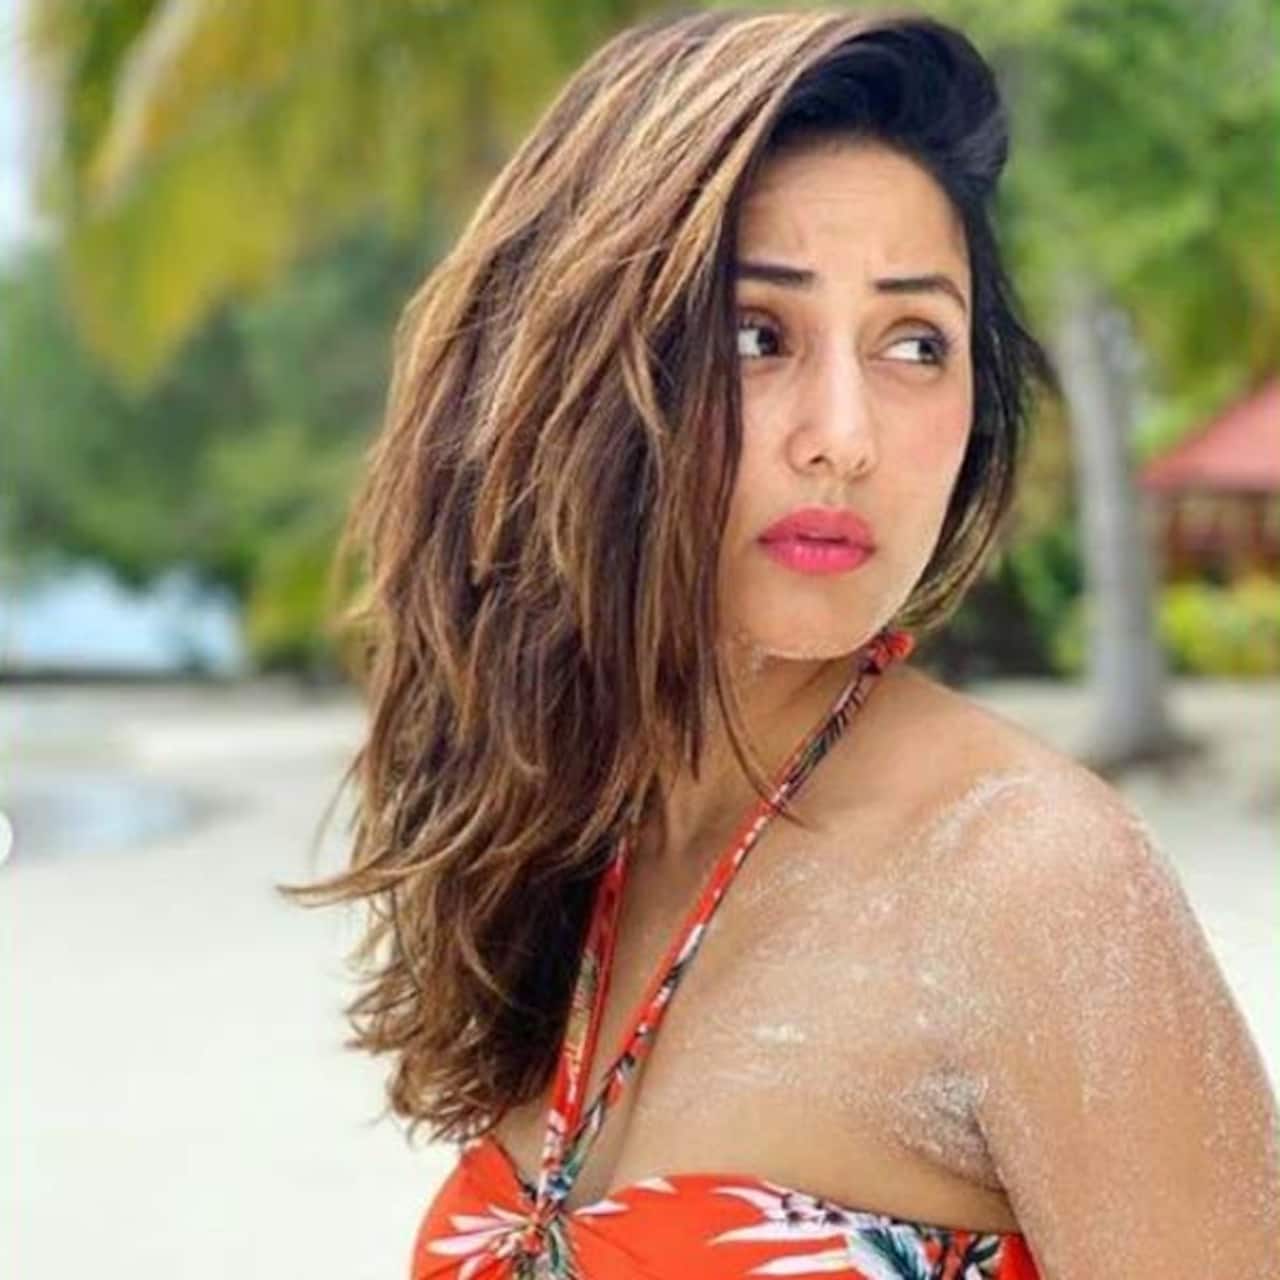 Hina Khan Looks Alluring In Throwback Bikini Pics From Her Beach Vacation